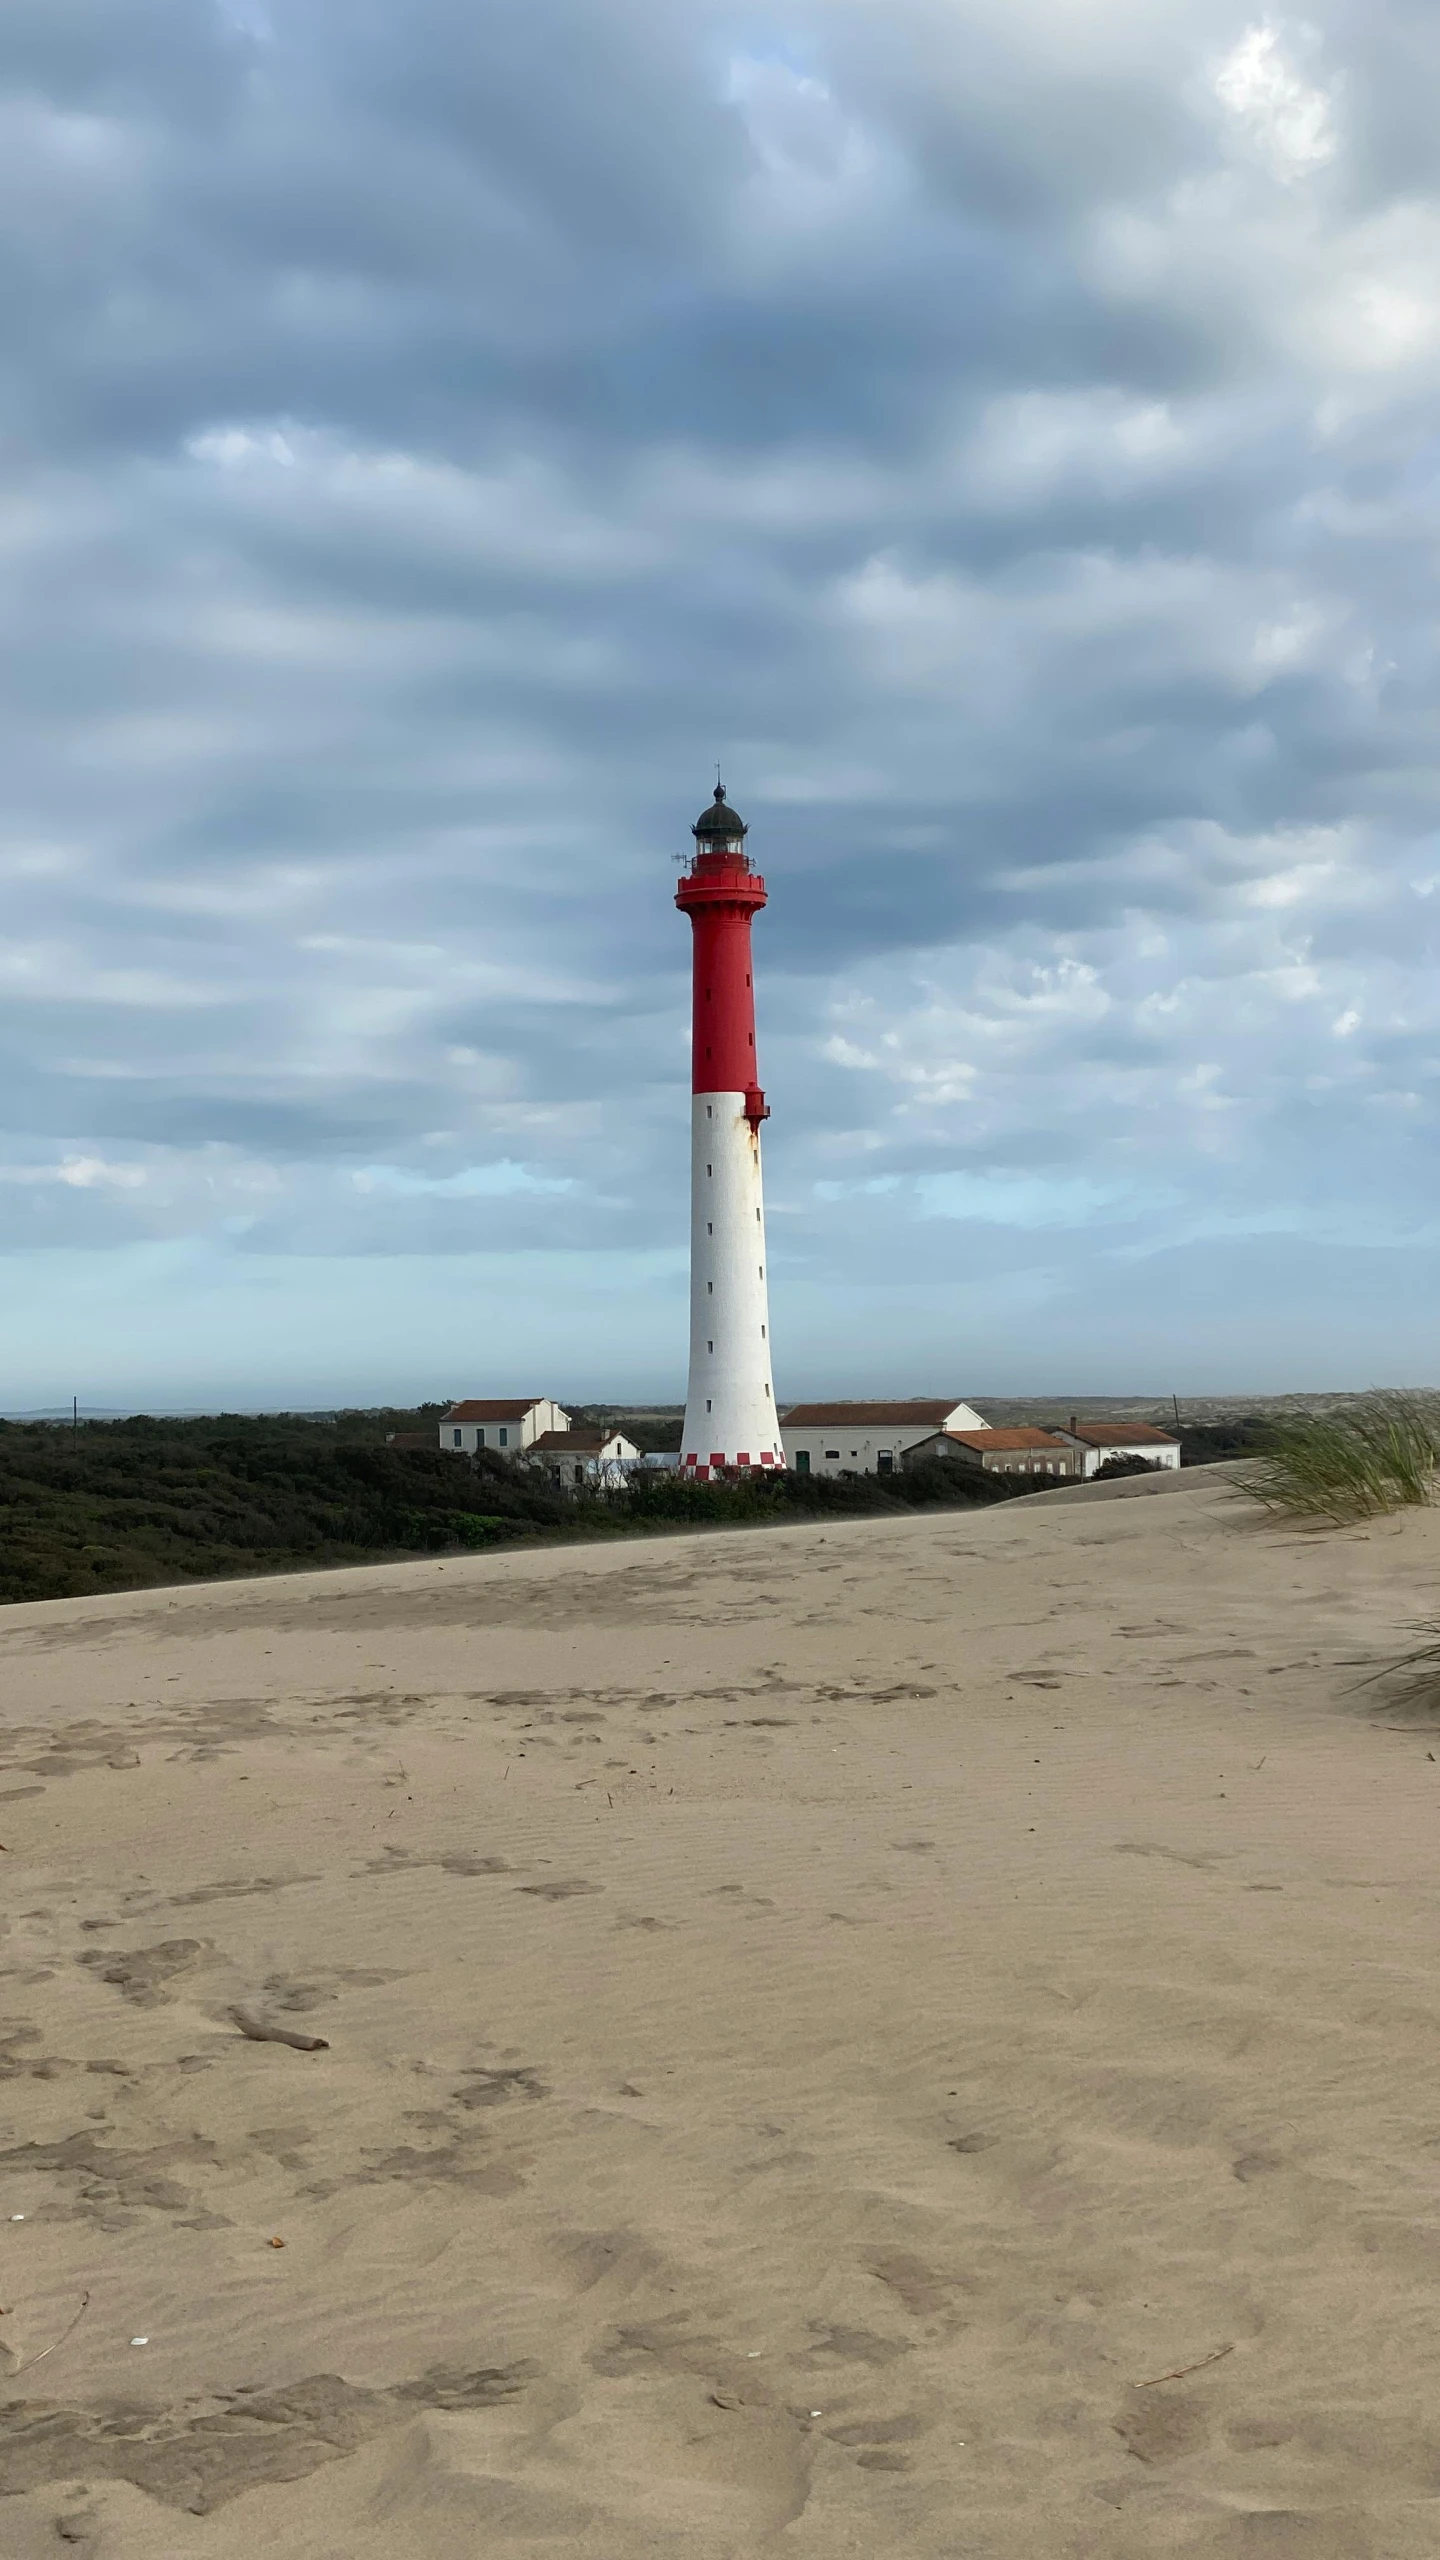 a lighthouse is surrounded by clouds near a beach